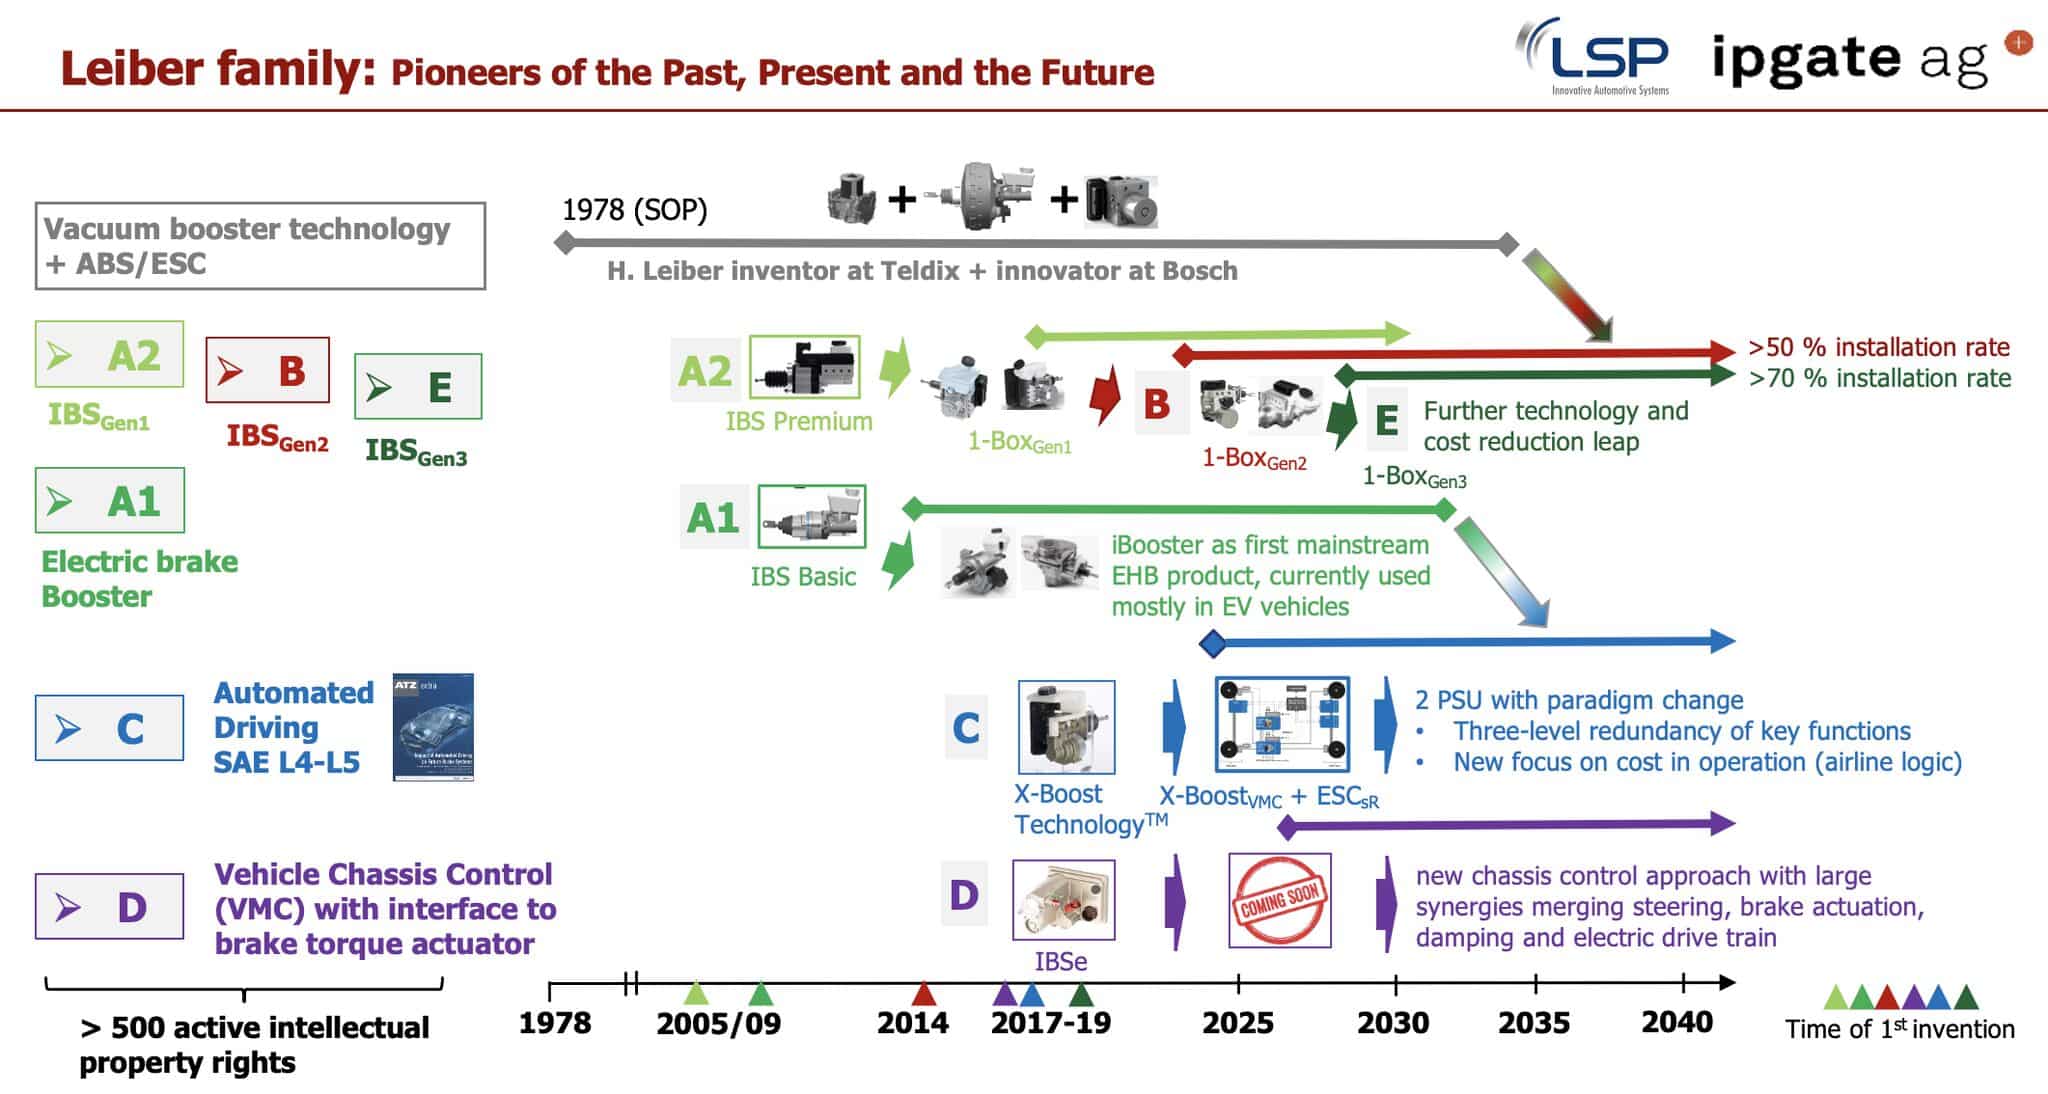 LSP's CEO Thomas Lieber presented his predictions on the future of brakes